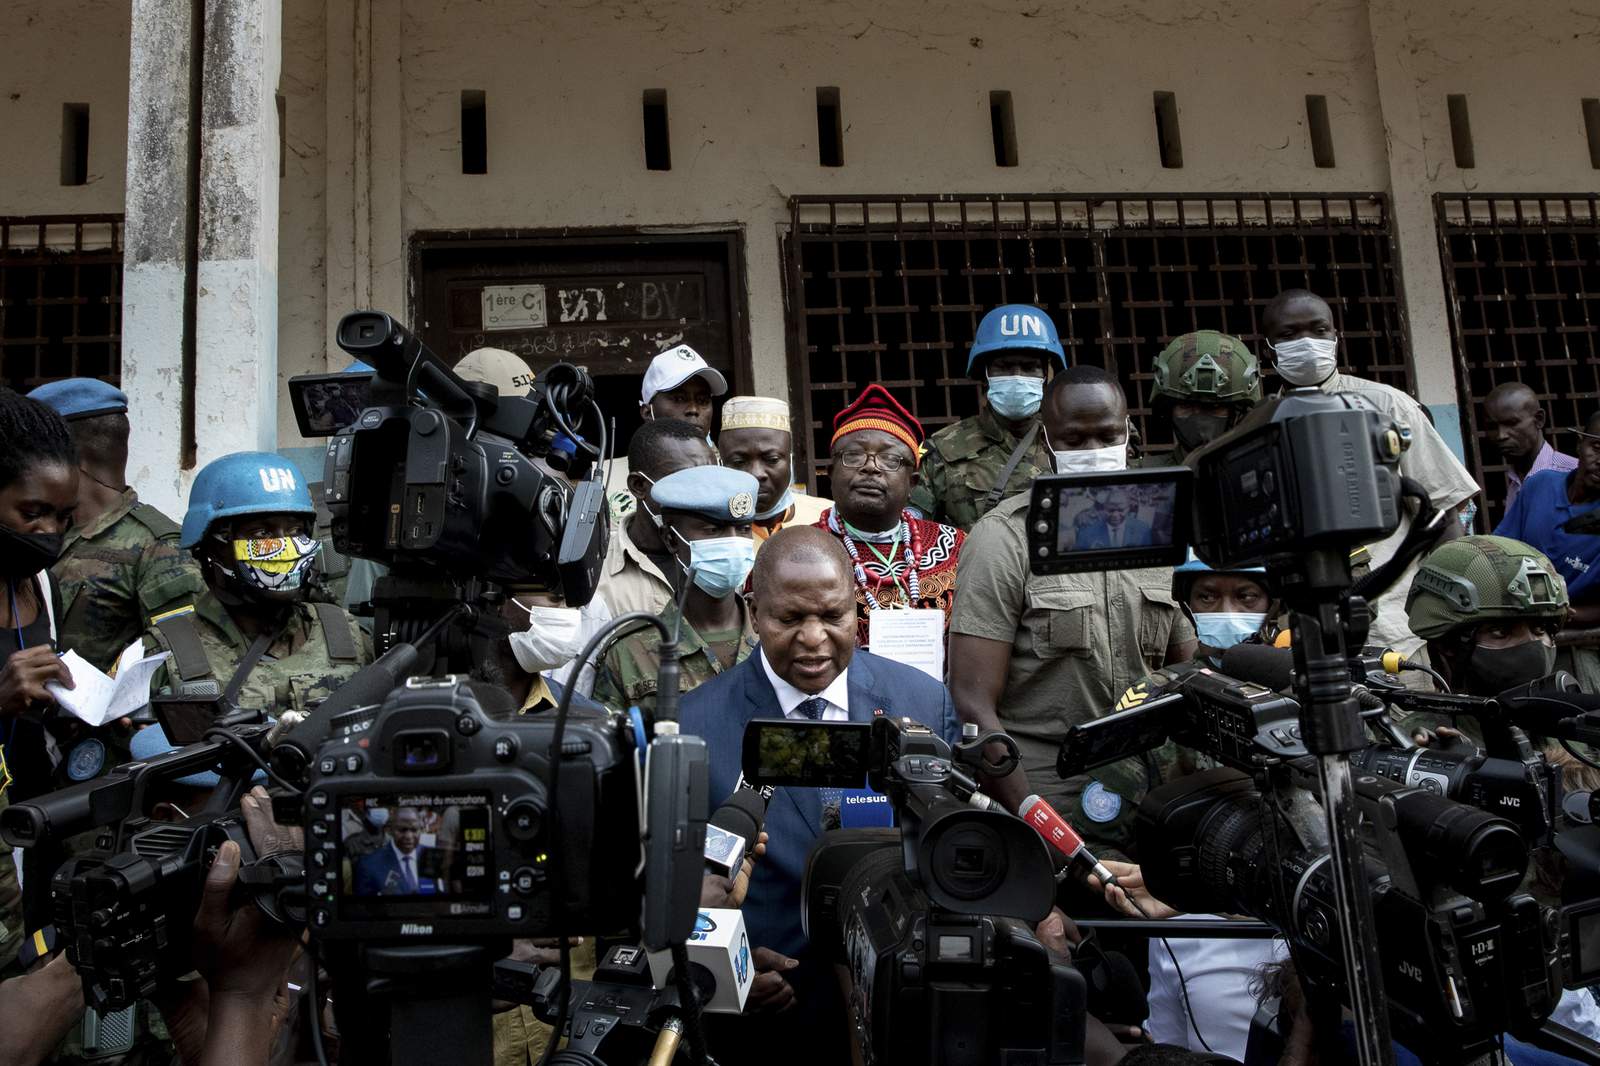 Central African Republic president Touadera reelected